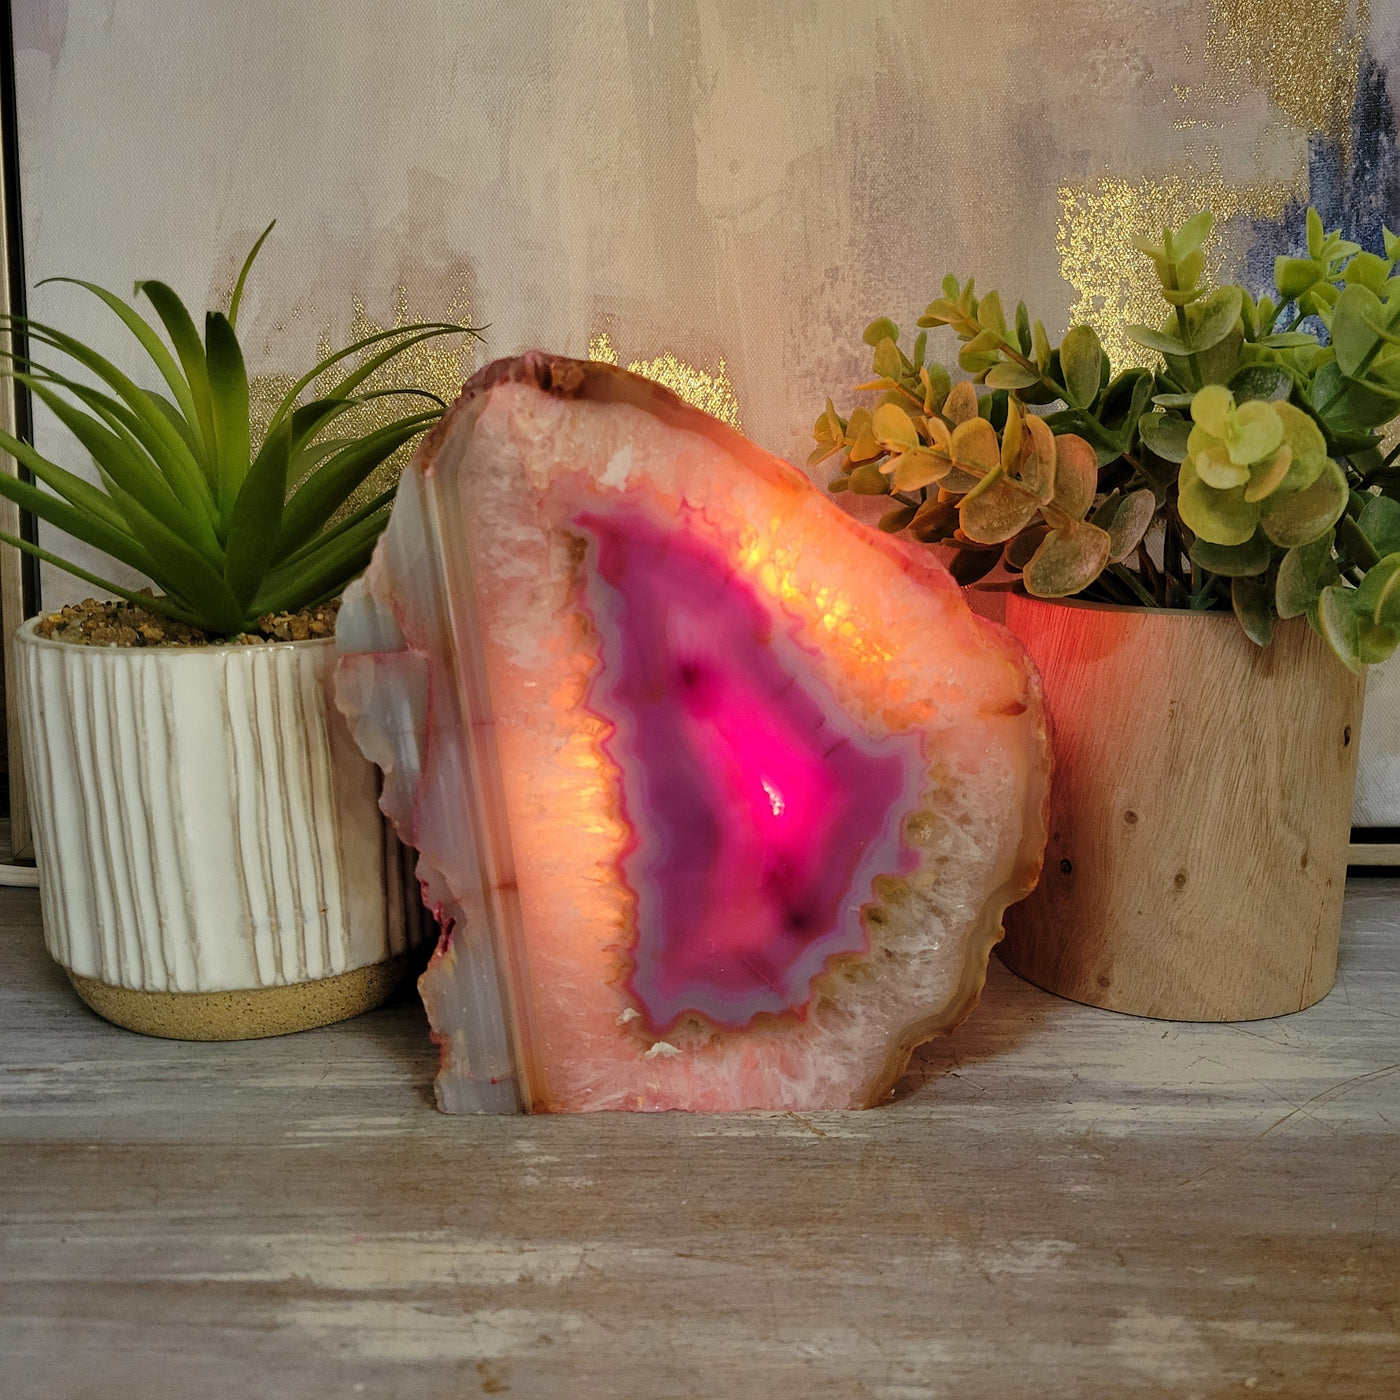 Agate Lamp 5-7" with bulb and cord (Blue, Pink, Natural, Purple) - Stunning Home Décor